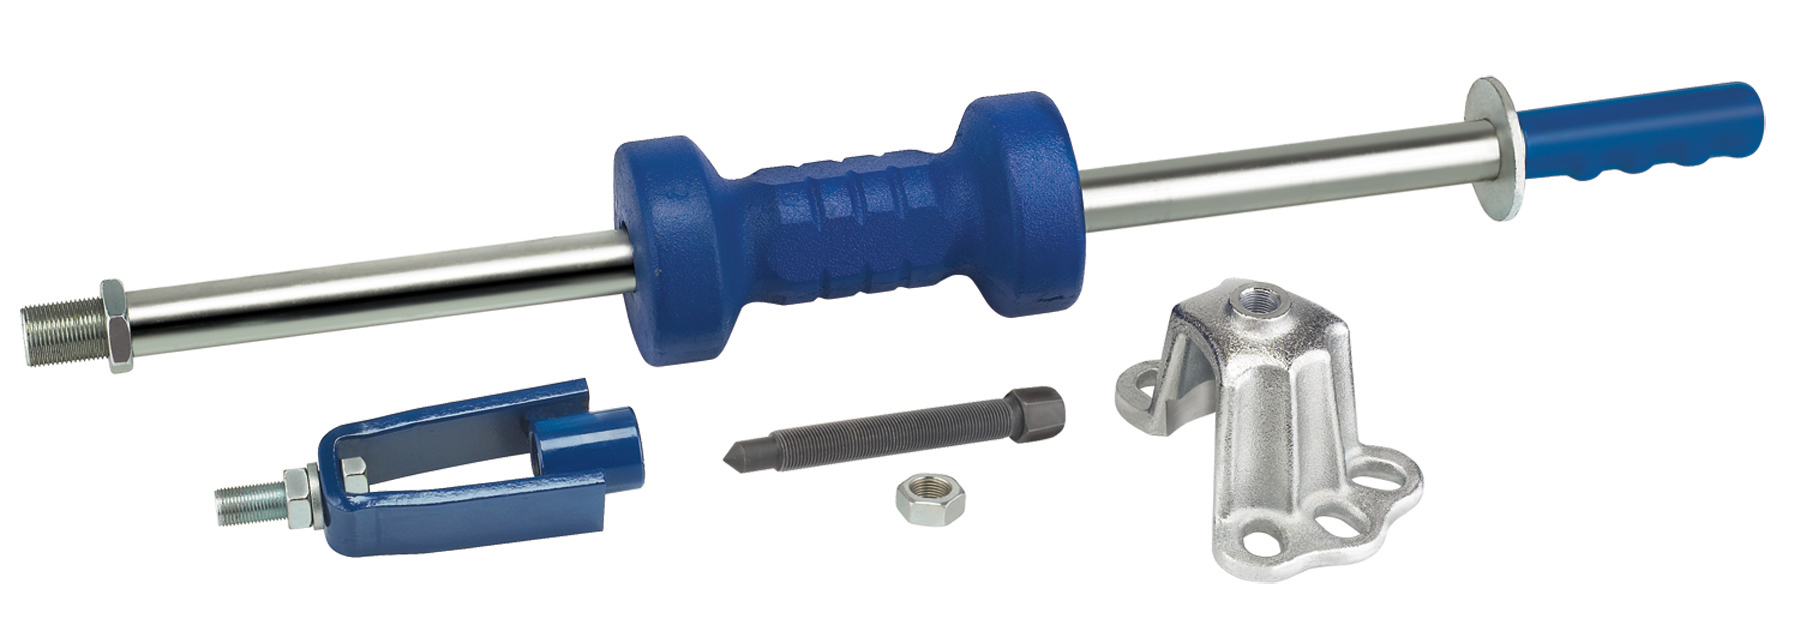 Front Wheel Hub Puller for Small to Midsize Lug Patterns & 10 lb